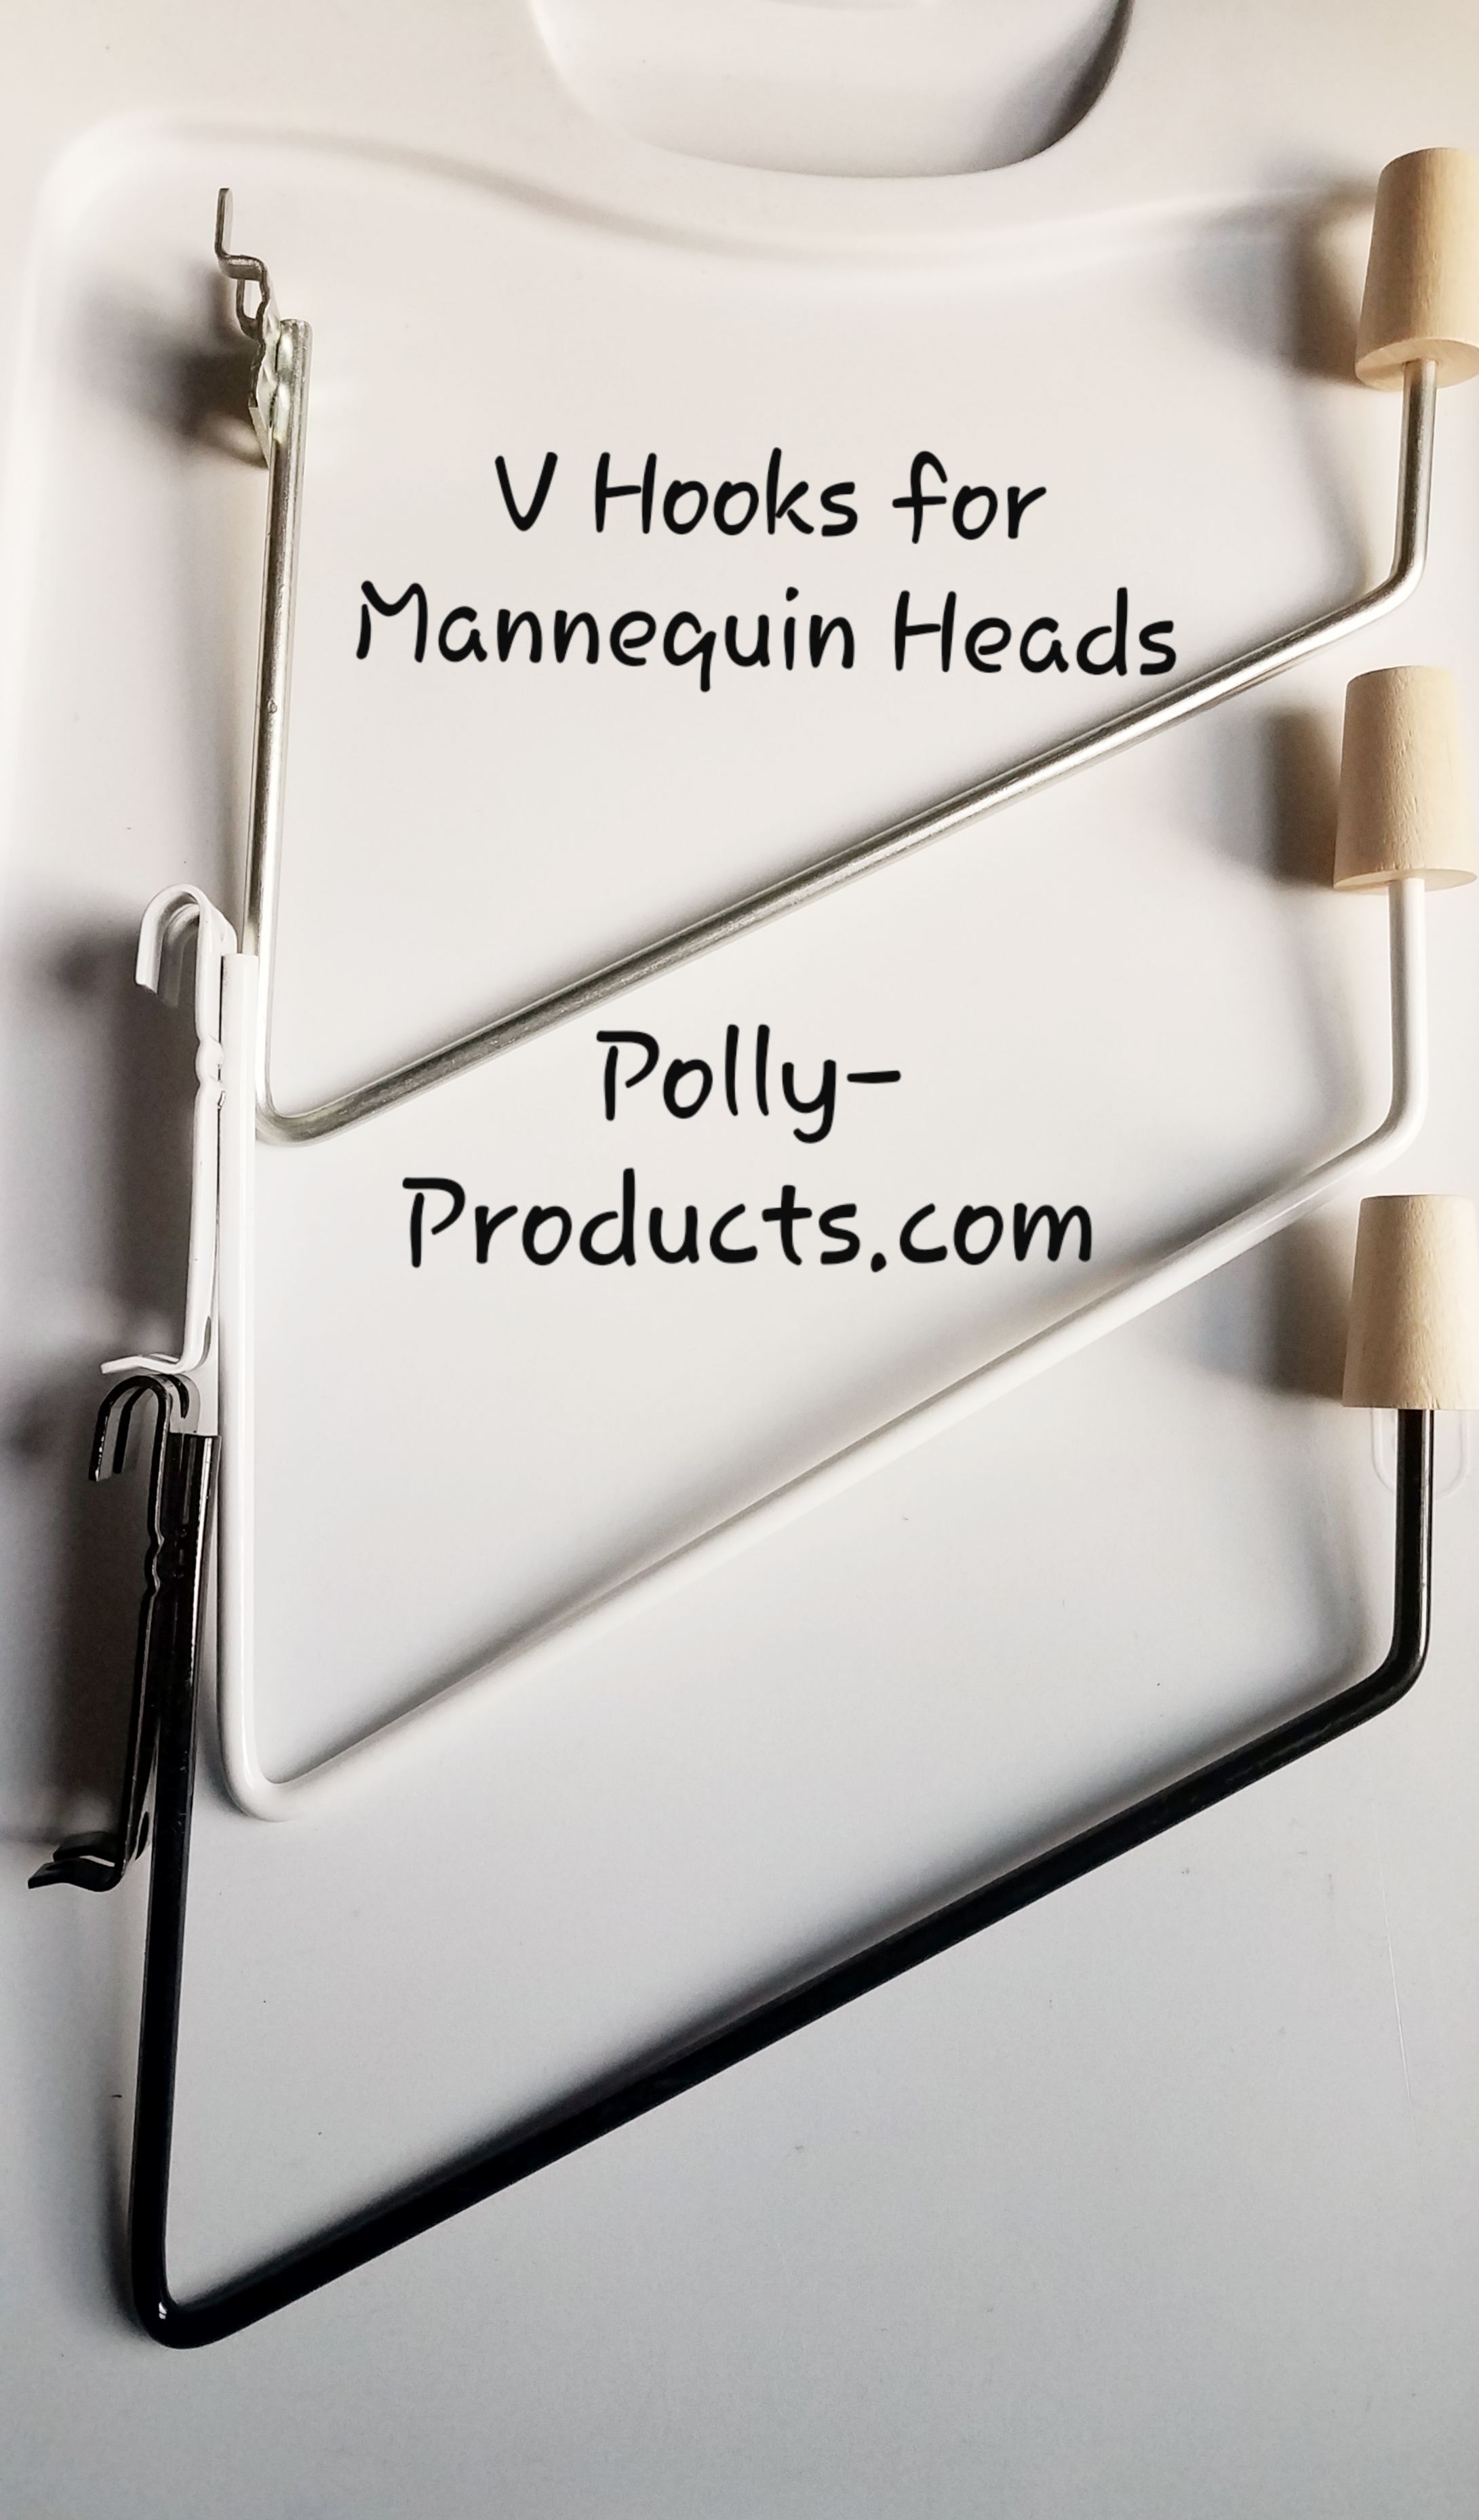 POLLY PRODUCTS COMPANY V-HOOKS FOR HEADS FOR SLAT-PEG-GRIDWALL